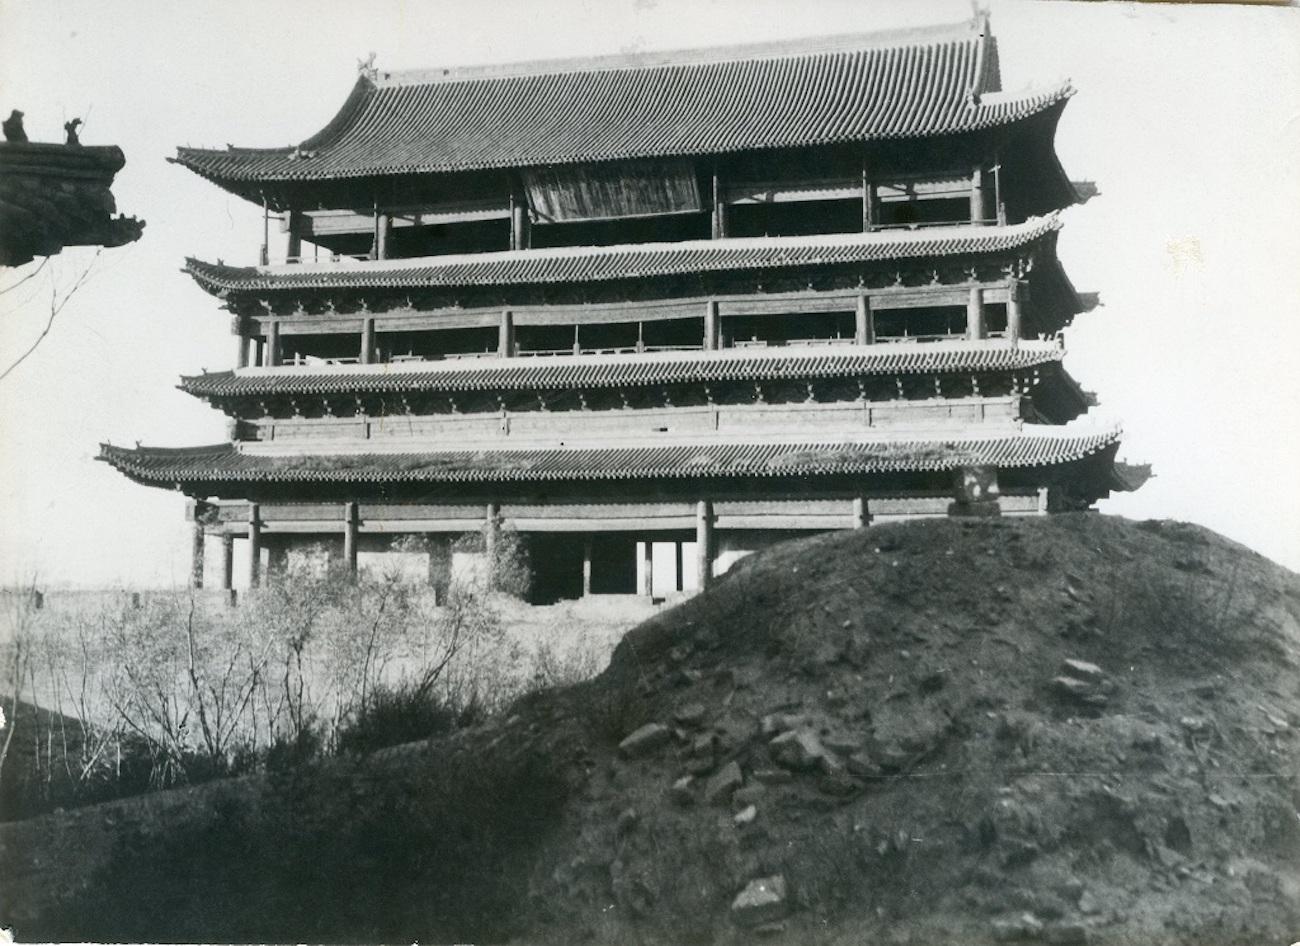 View on the City of Taiyuan - Vintage Photo 1938